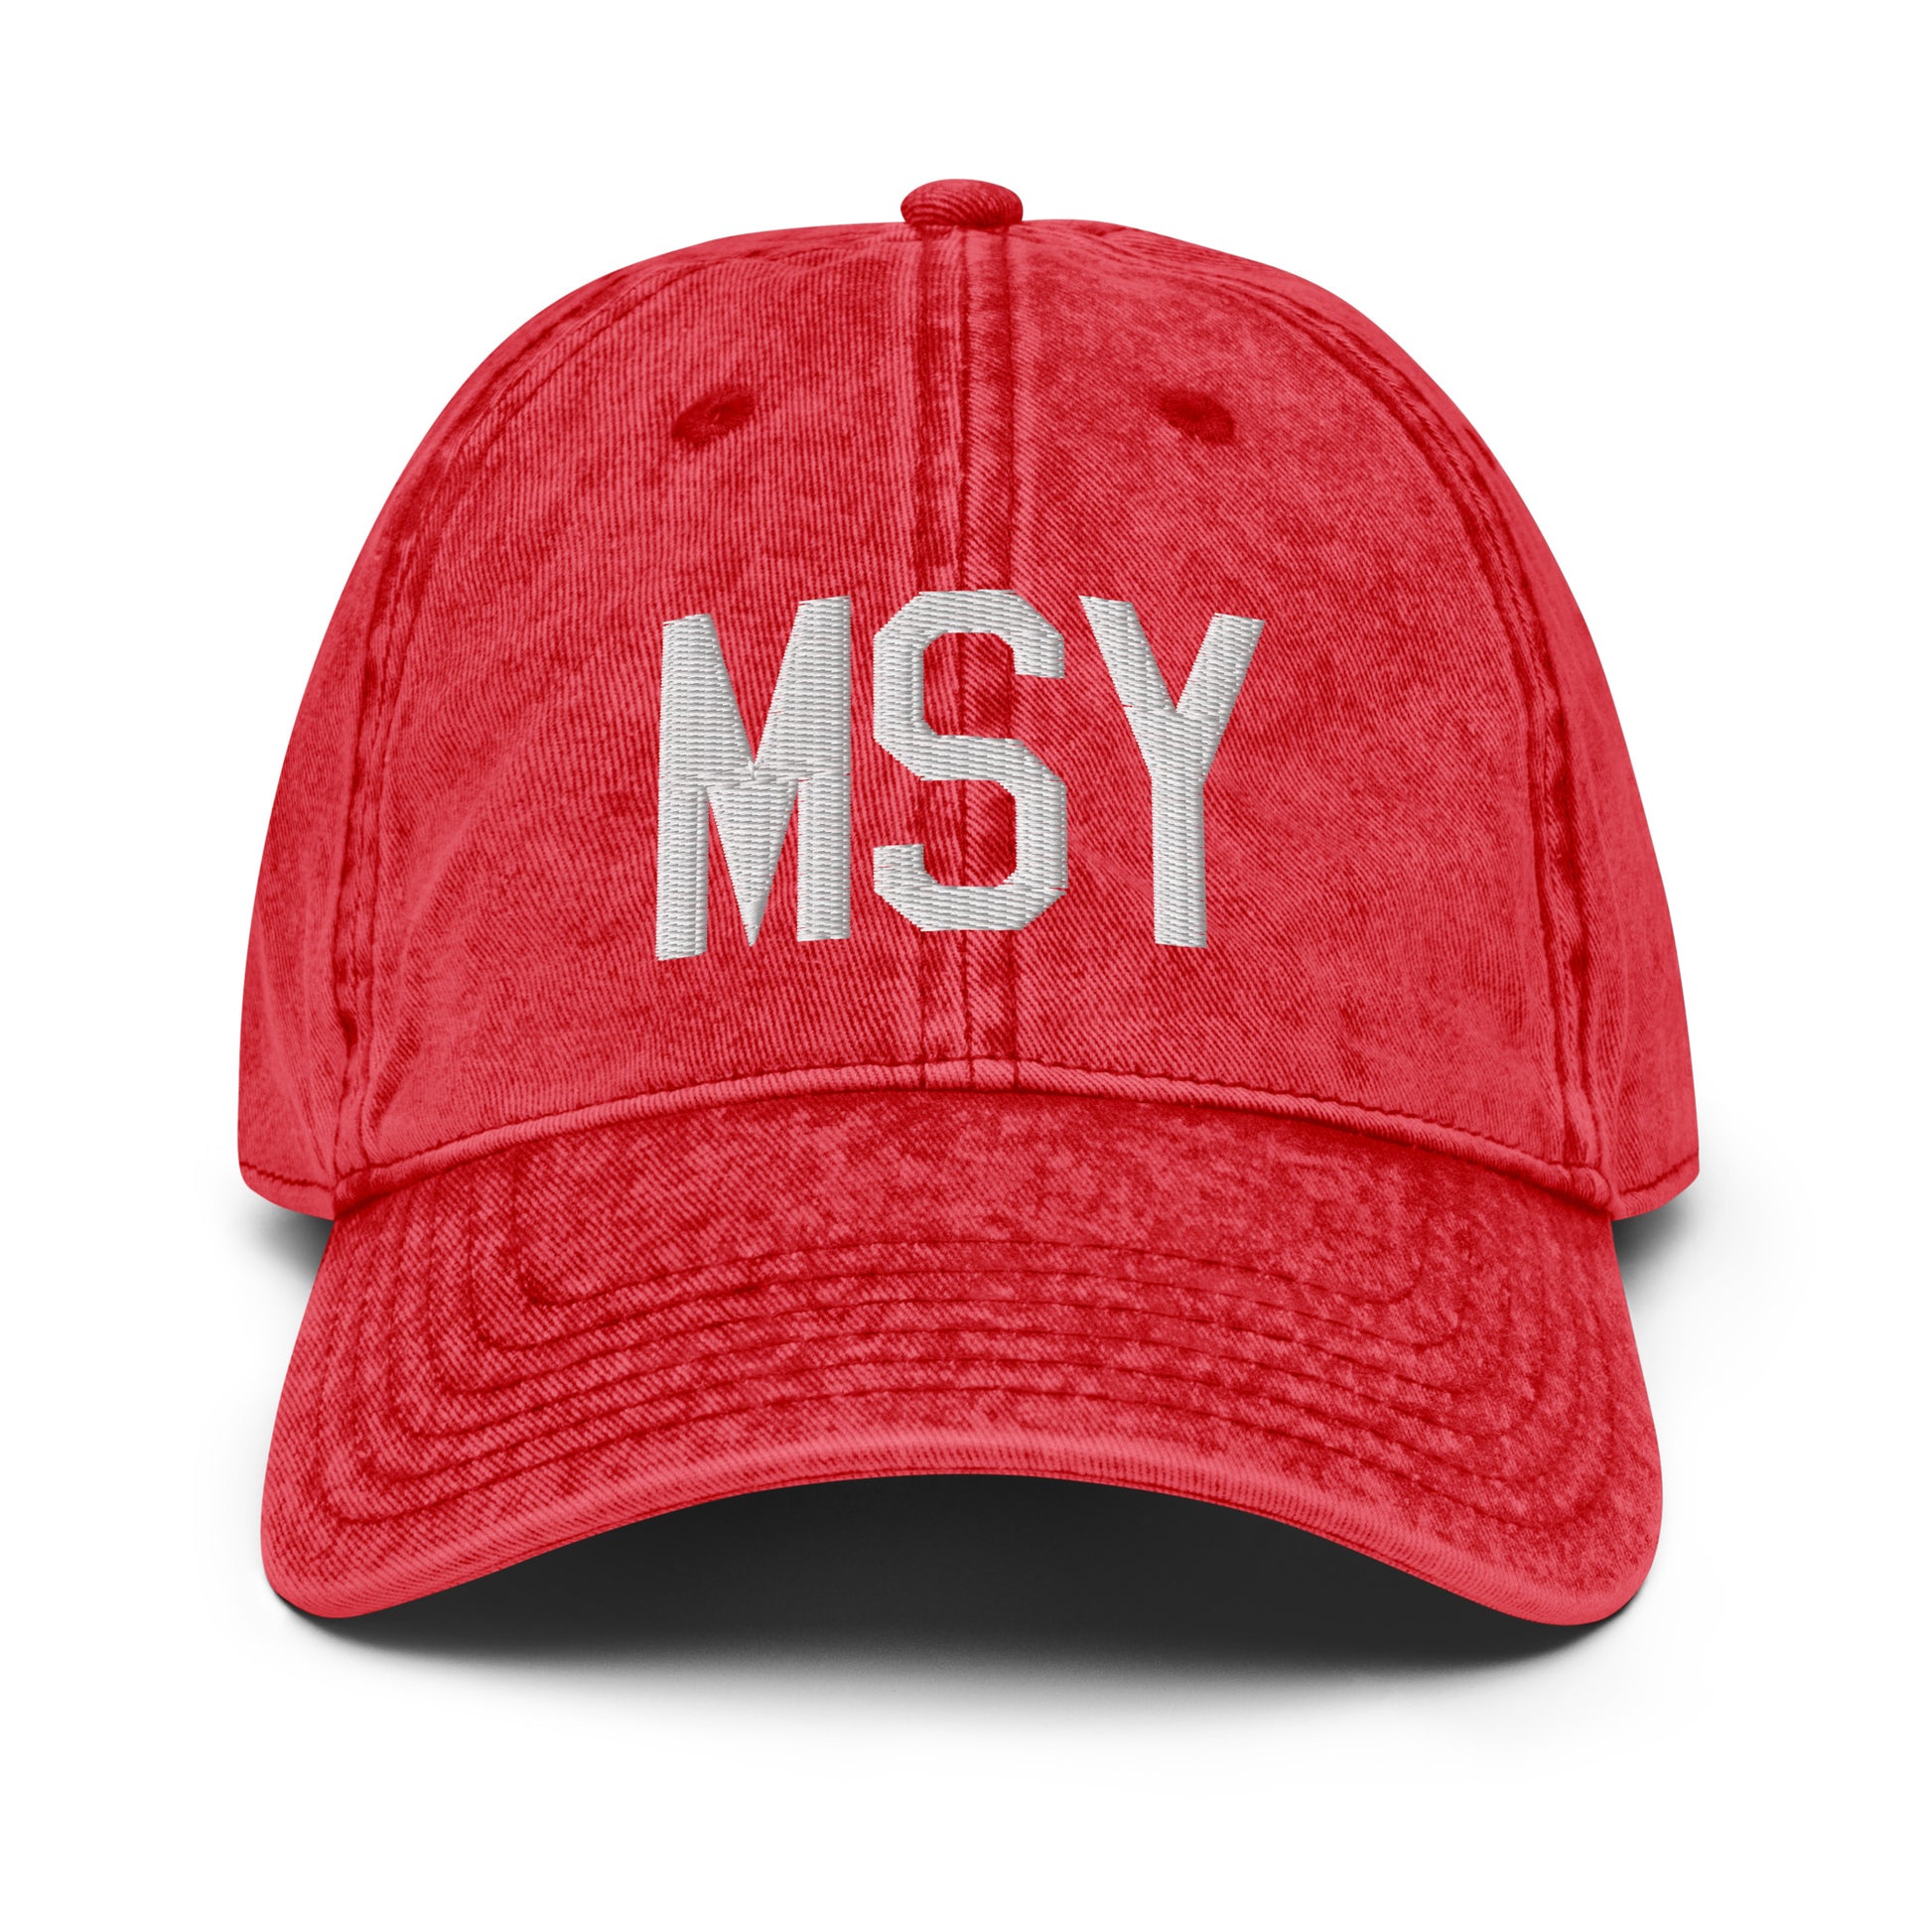 Airport Code Twill Cap - White • MSY New Orleans • YHM Designs - Image 22